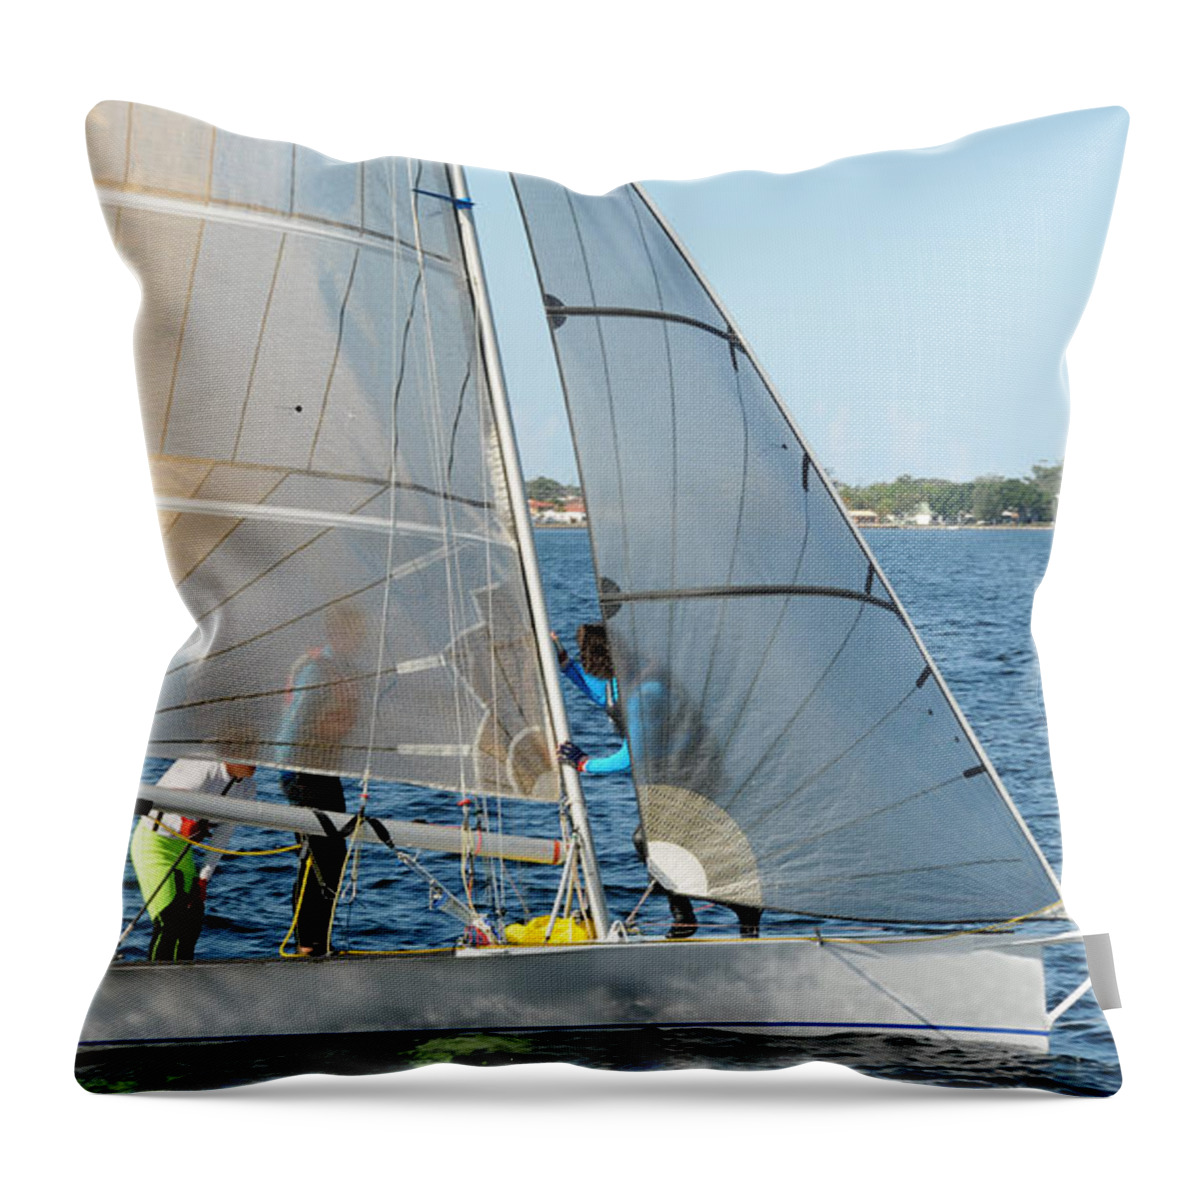 Sky Throw Pillow featuring the photograph Children Sailing small dinghy with white sails up-close on an in by Geoff Childs